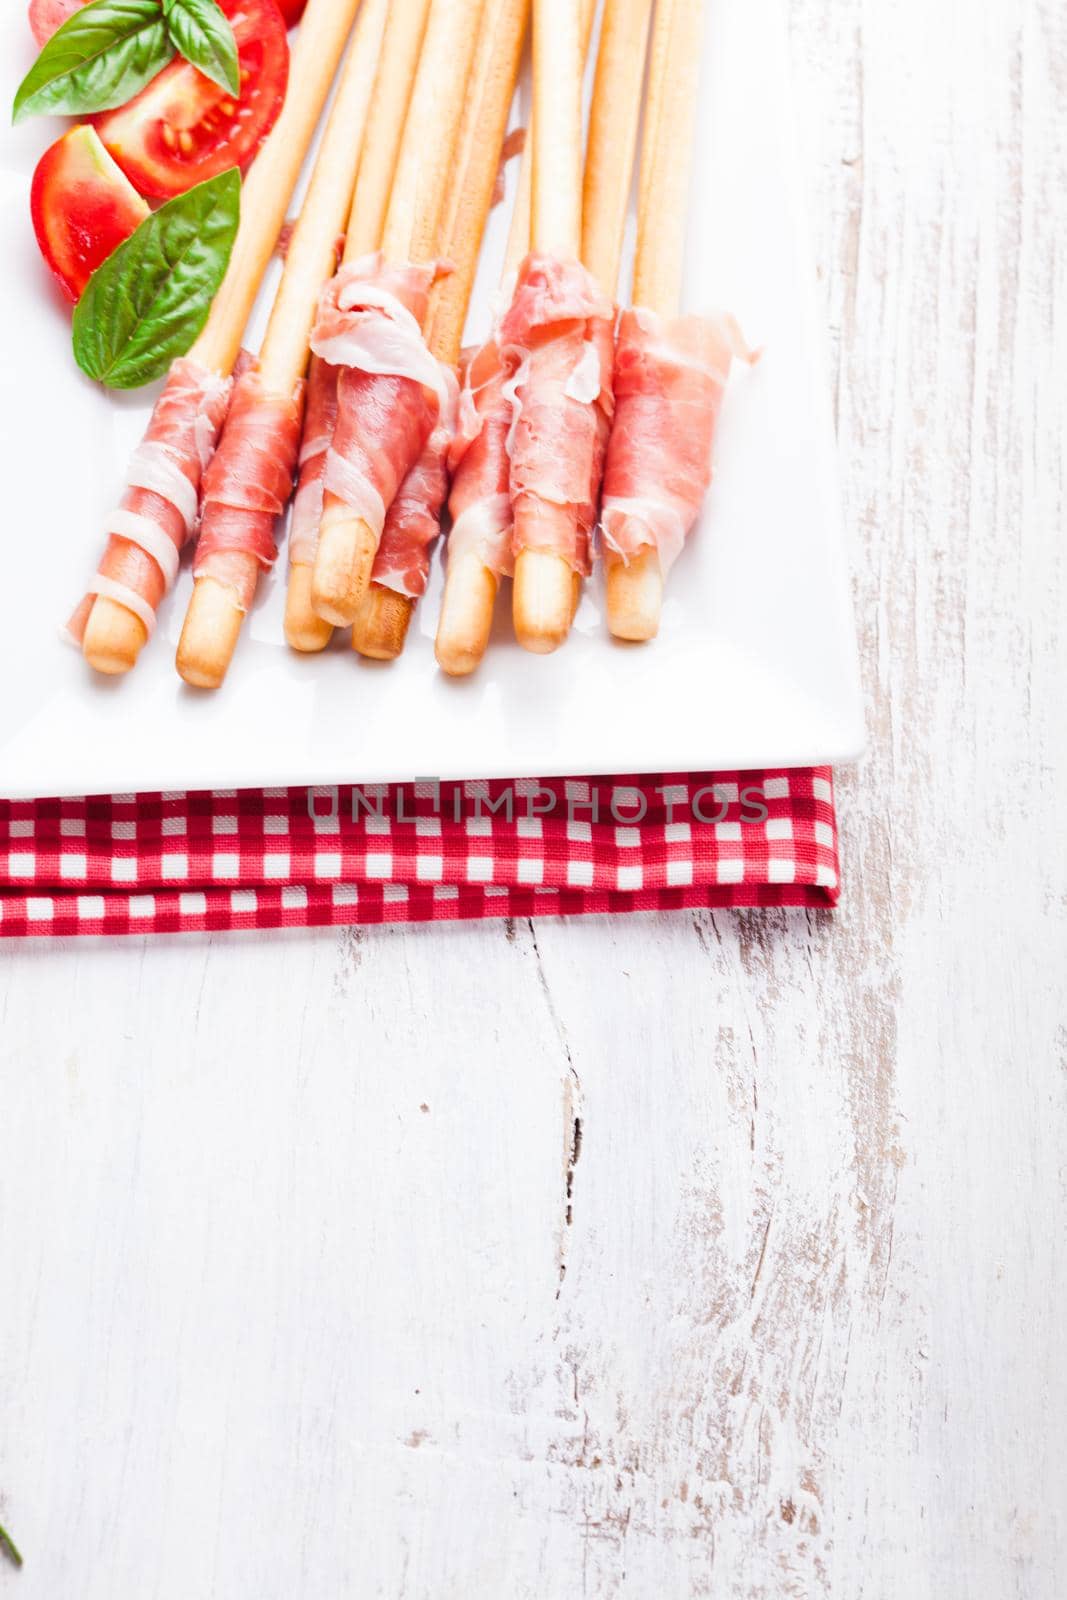 Grissini with prosciutto by oksix